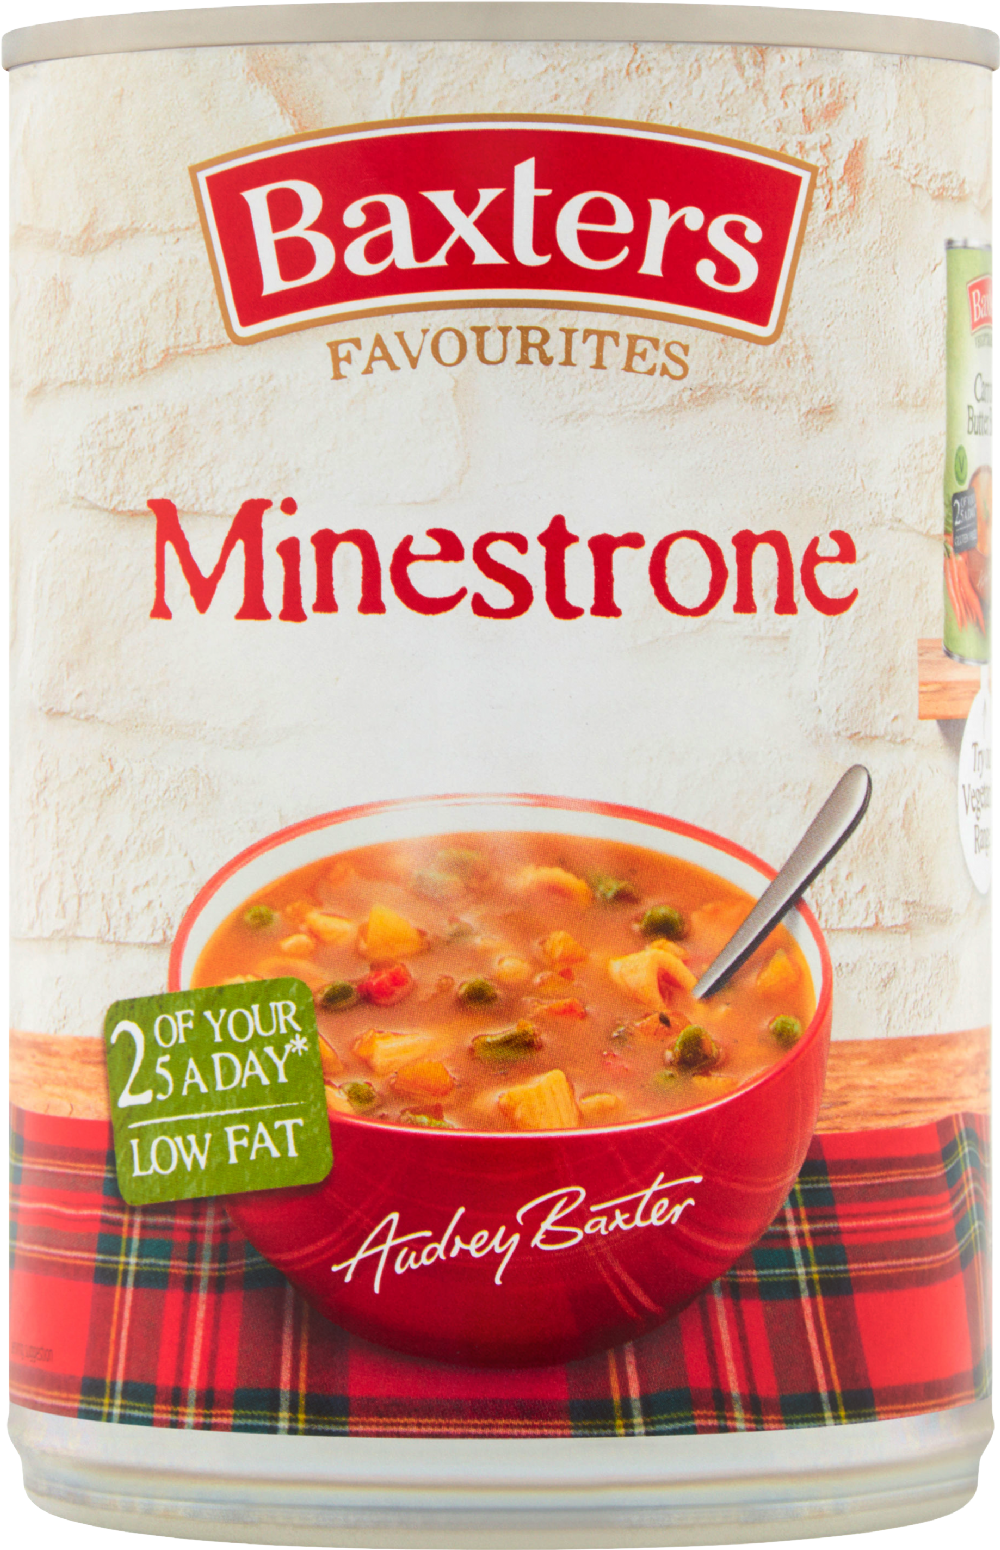 BAXTERS Favourites Minestrone Soup 400g